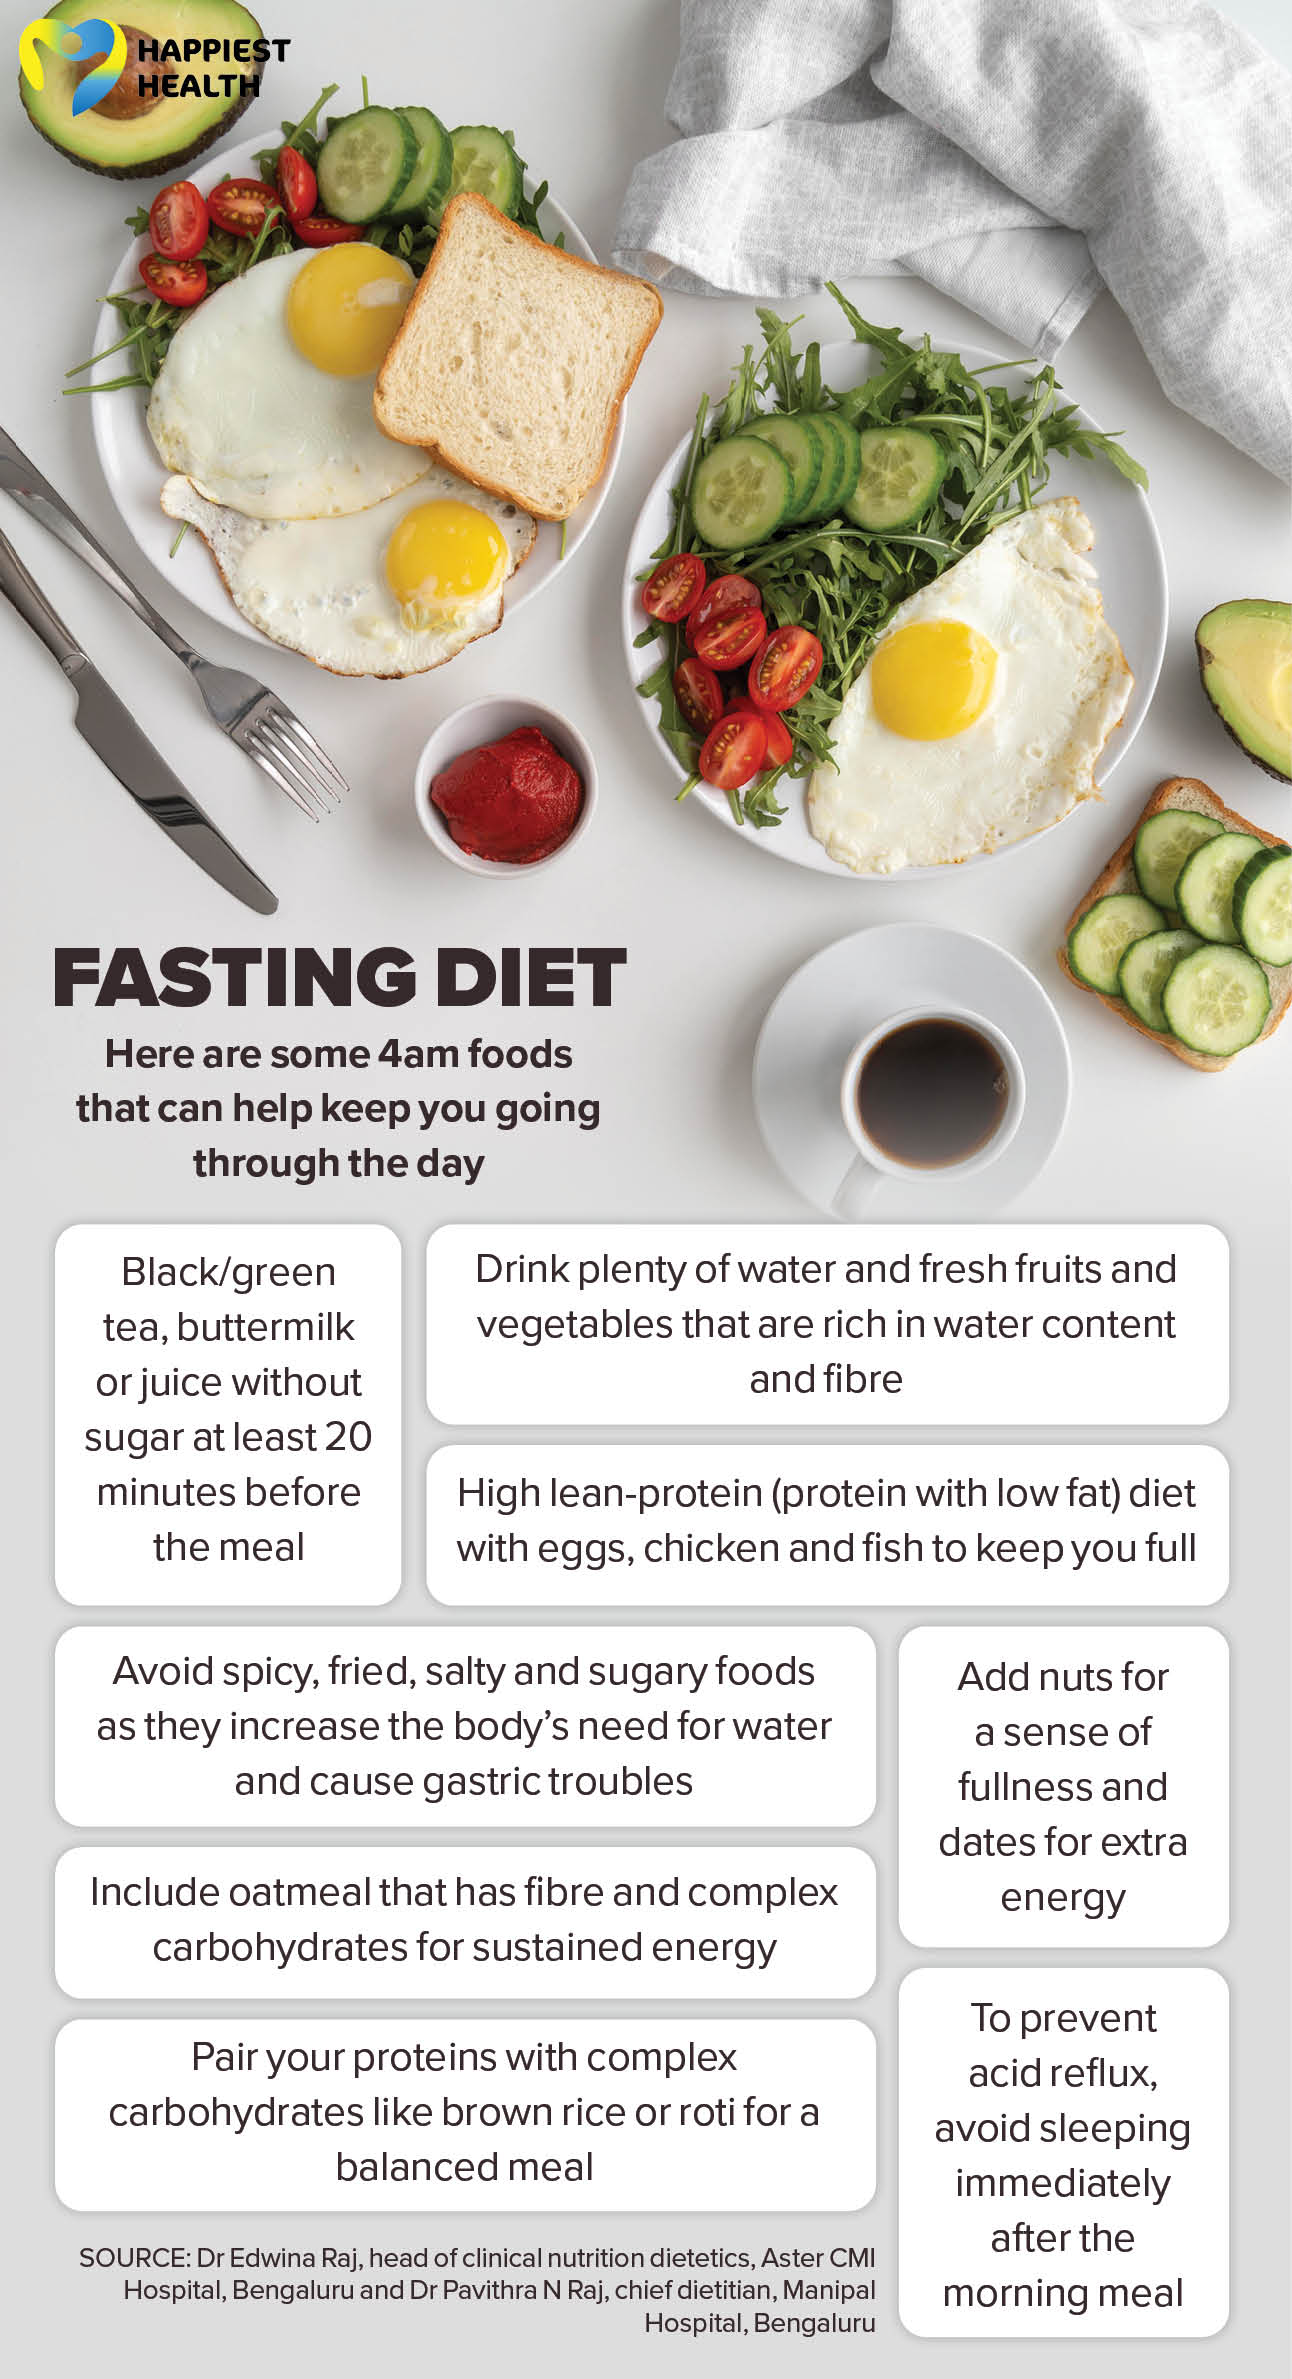 Fasting diet: some 4am foods that can help keep you going through the day